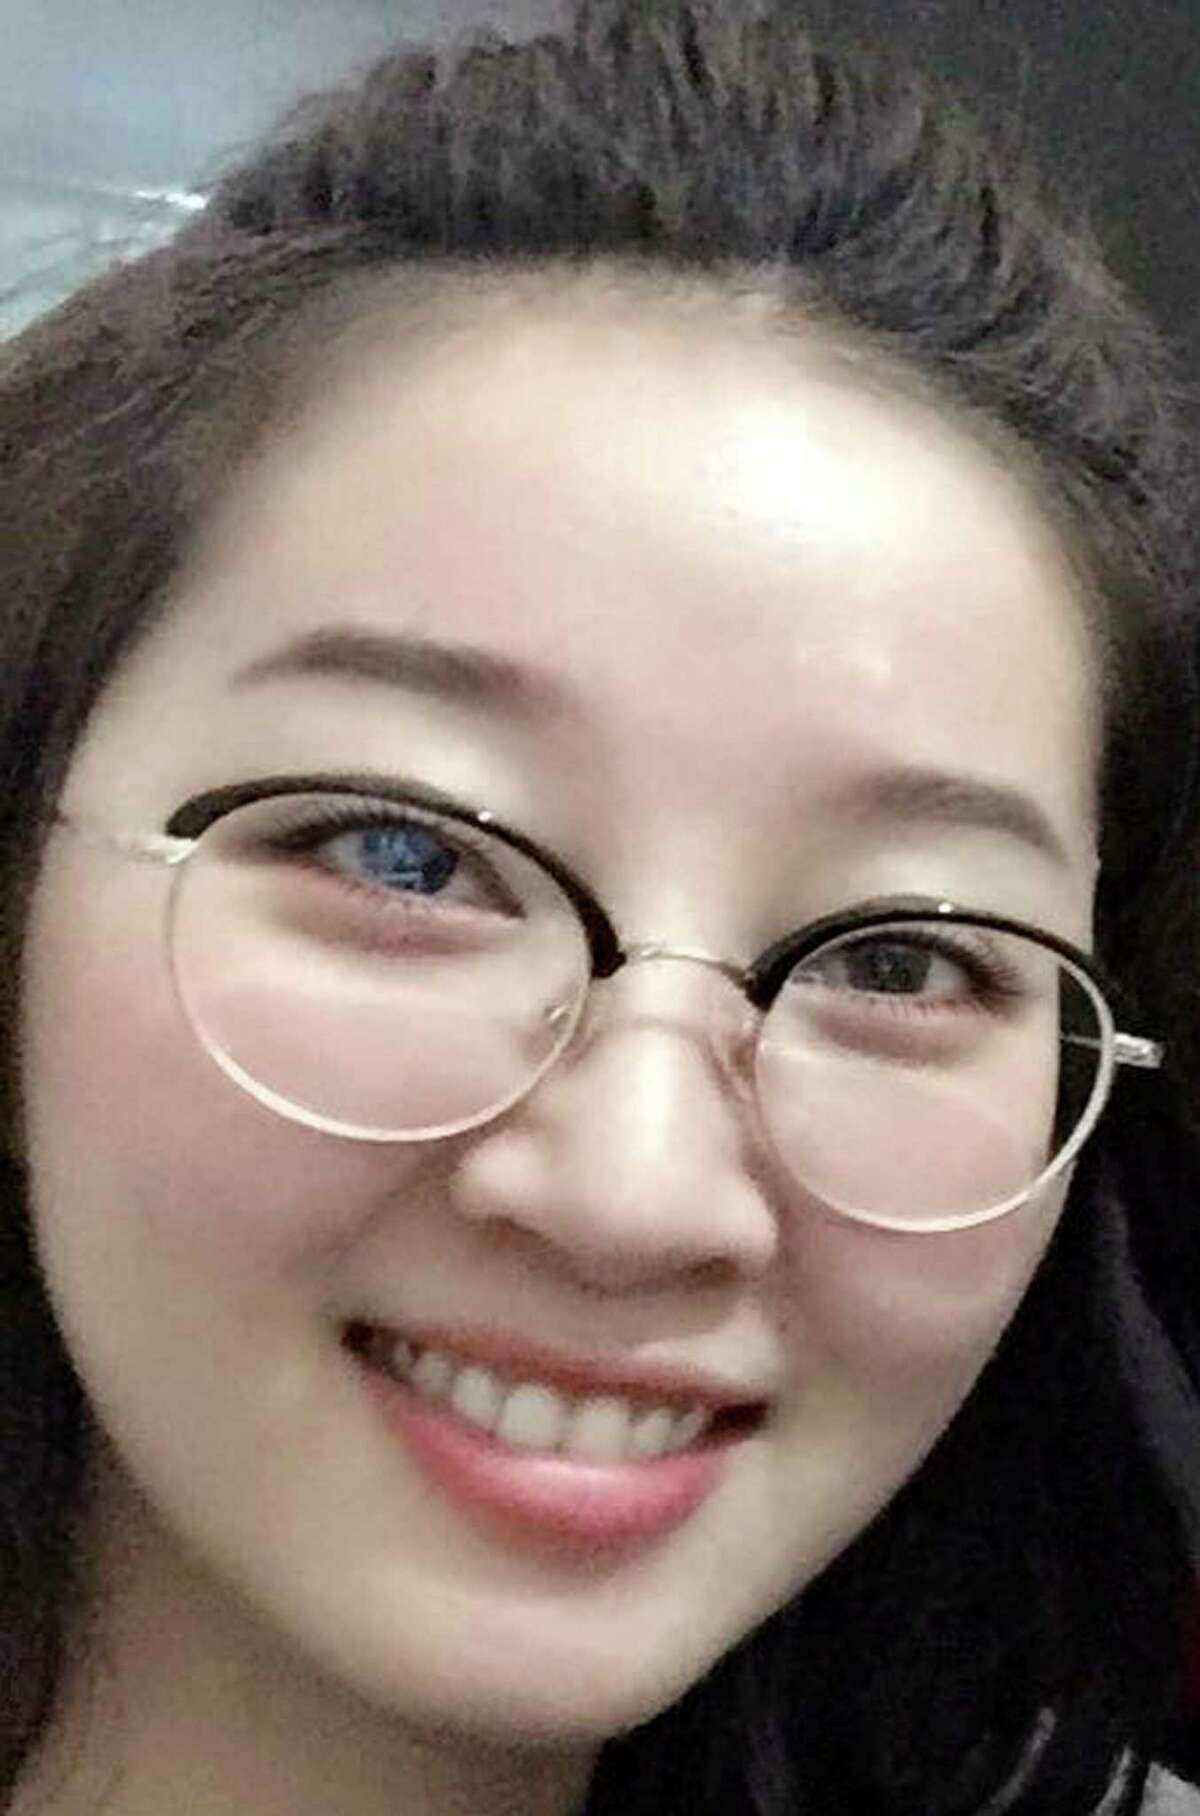 This undated photo provided by the University of Illinois Police Department shows Yingying Zhang. Police said the FBI is investigating the disappearance of Zhang, a Chinese woman from a central Illinois university town, as a kidnapping. Zhang was about a month into a yearlong appointment at the University of Illinois' Urbana-Champaign when she disappeared June 9, 2017. (Courtesy of the University of Illinois Police Department via AP)